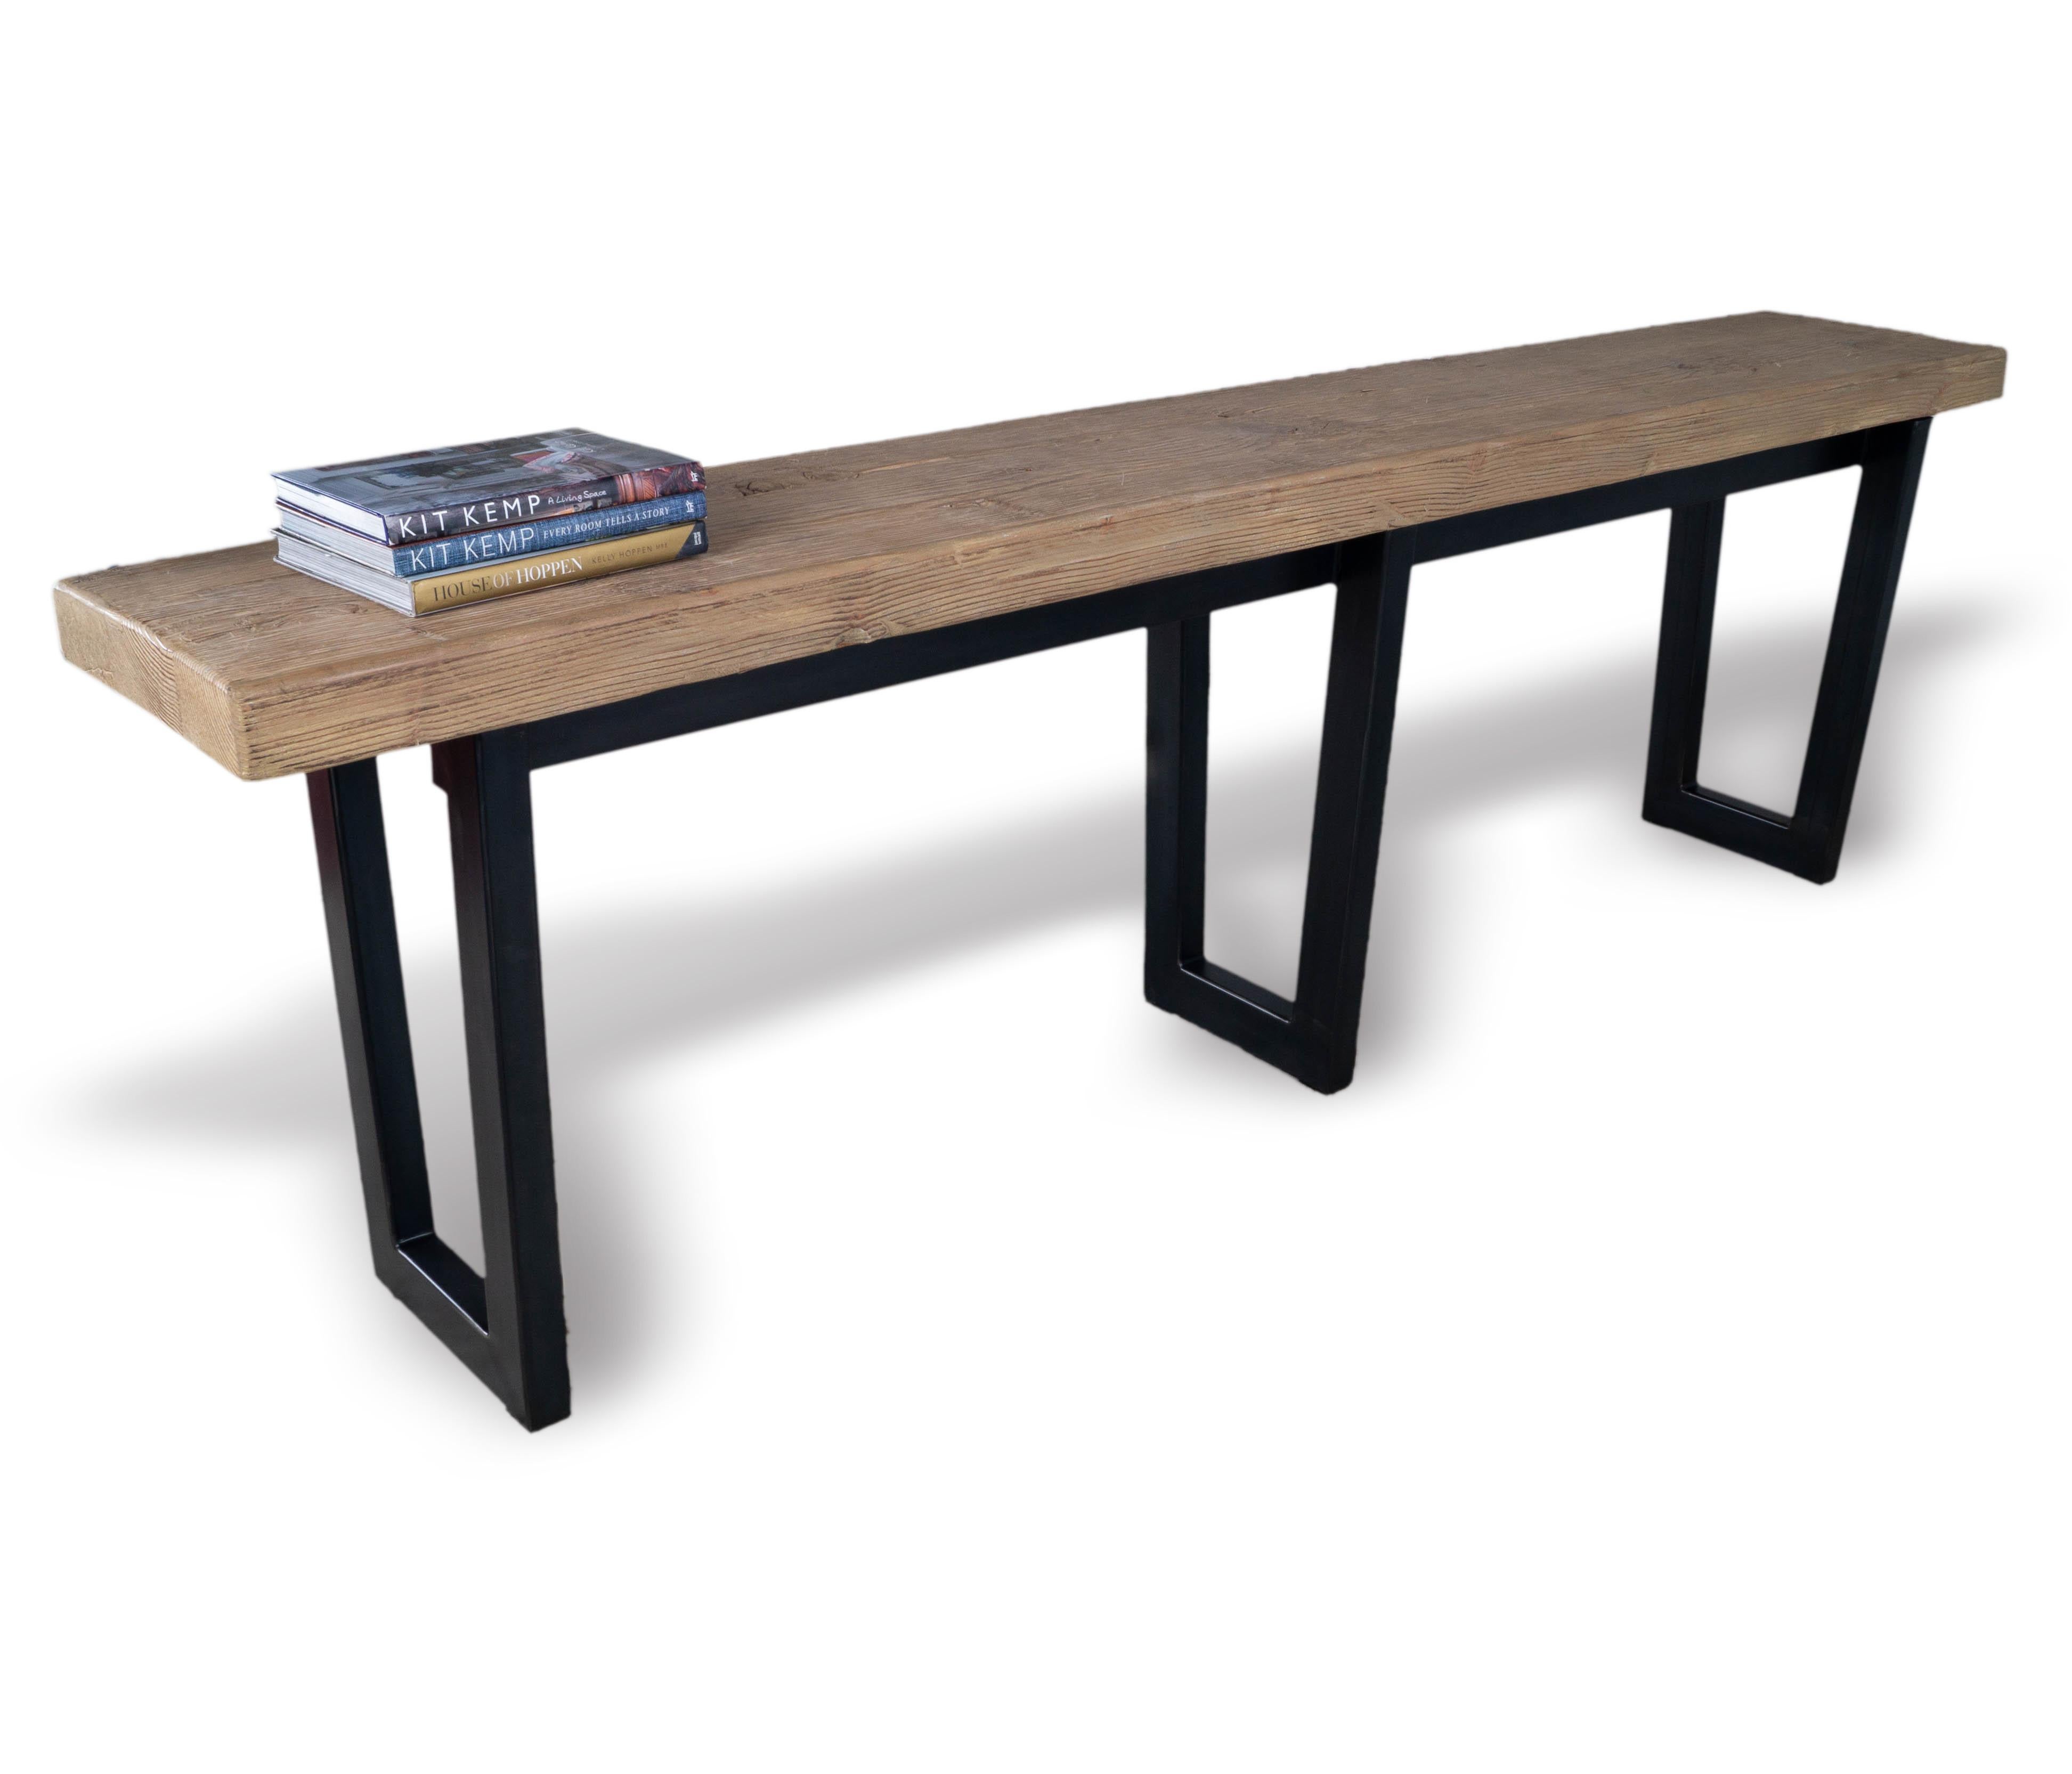 Make a statement with this beautiful Reclaimed Elm Console Table. Crafted from organic reclaimed elm wood on top of an ebonized steel base, its mid-century, industrial inspired style is perfect for any modern home or office. Be the envy of your